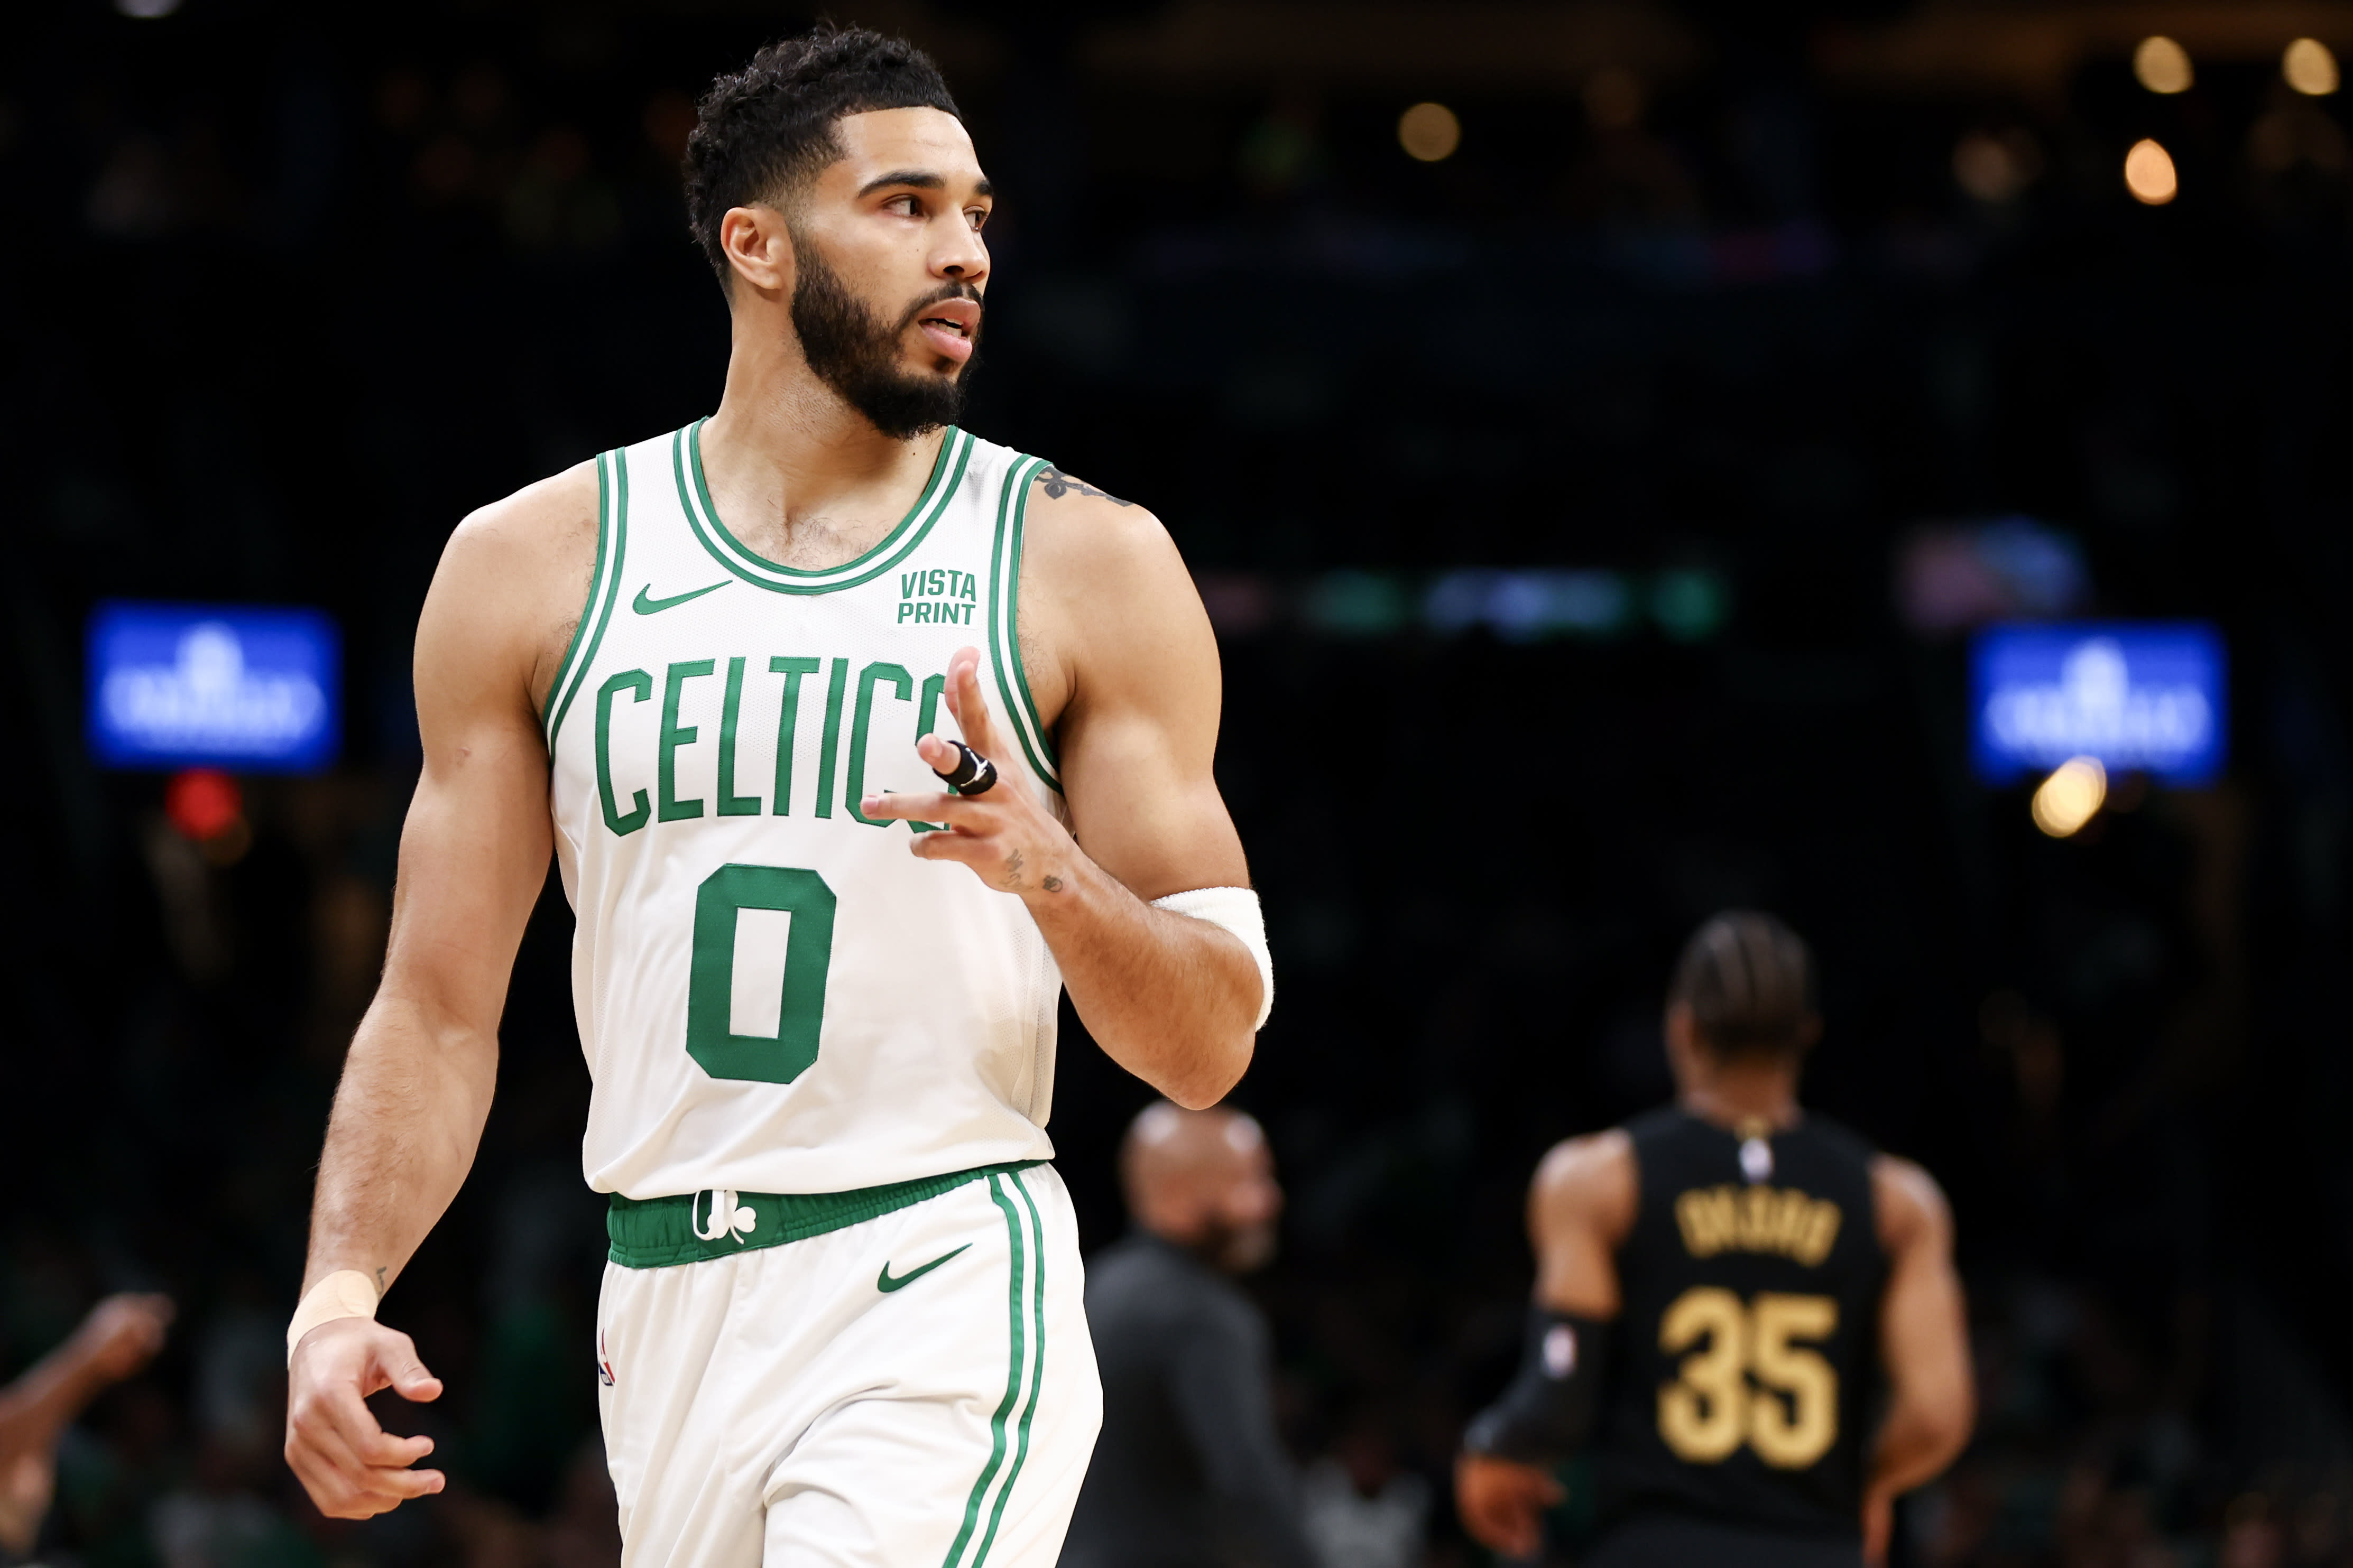 The Celtics are still waiting for a challenger to emerge in the East, but will there be one?